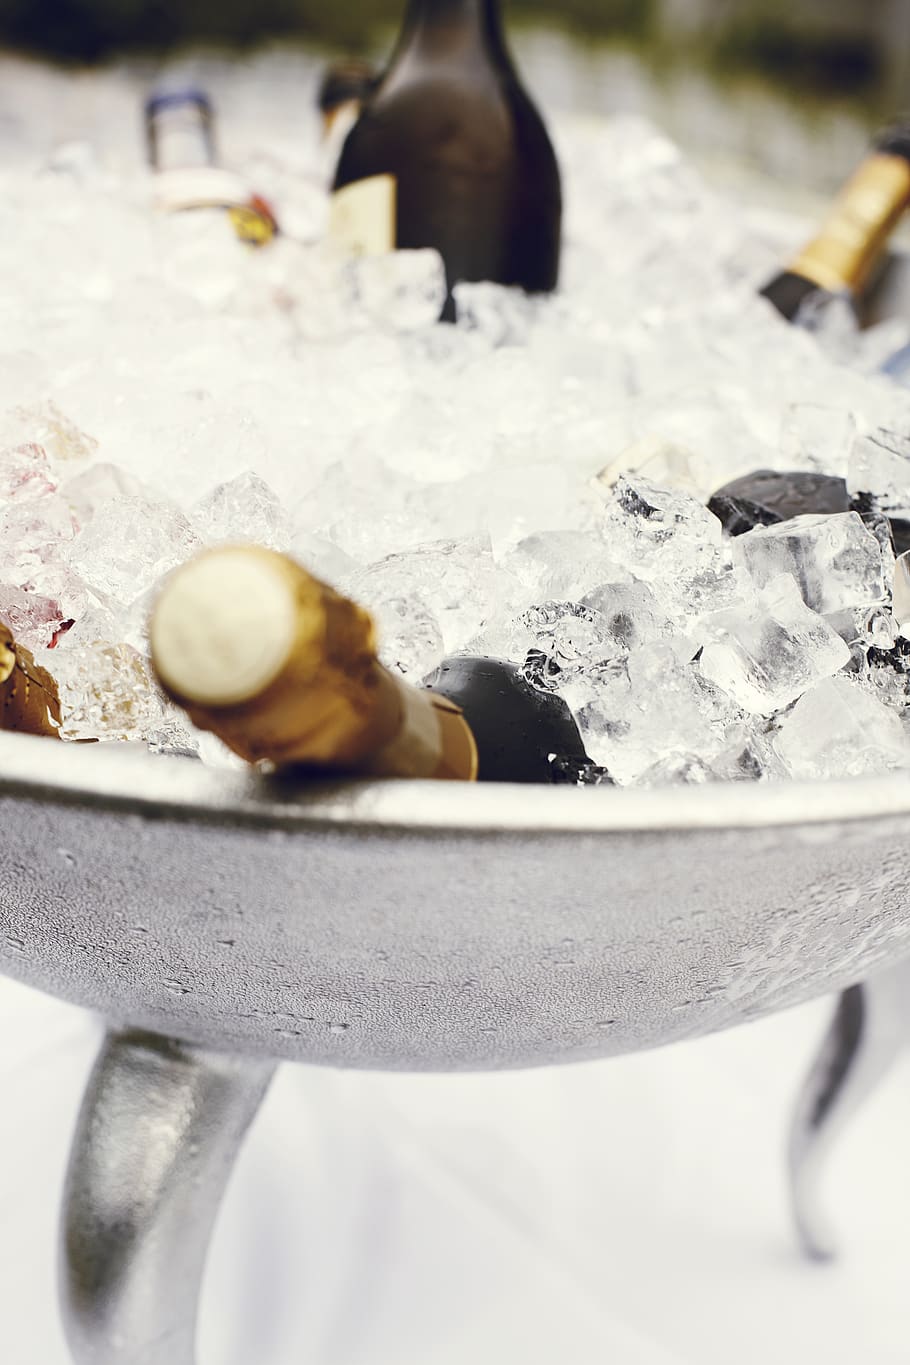 champagne cup, champagne cooler, champagne bucket, ice, champagne, celebration, drink, bottles, festival, alcohol